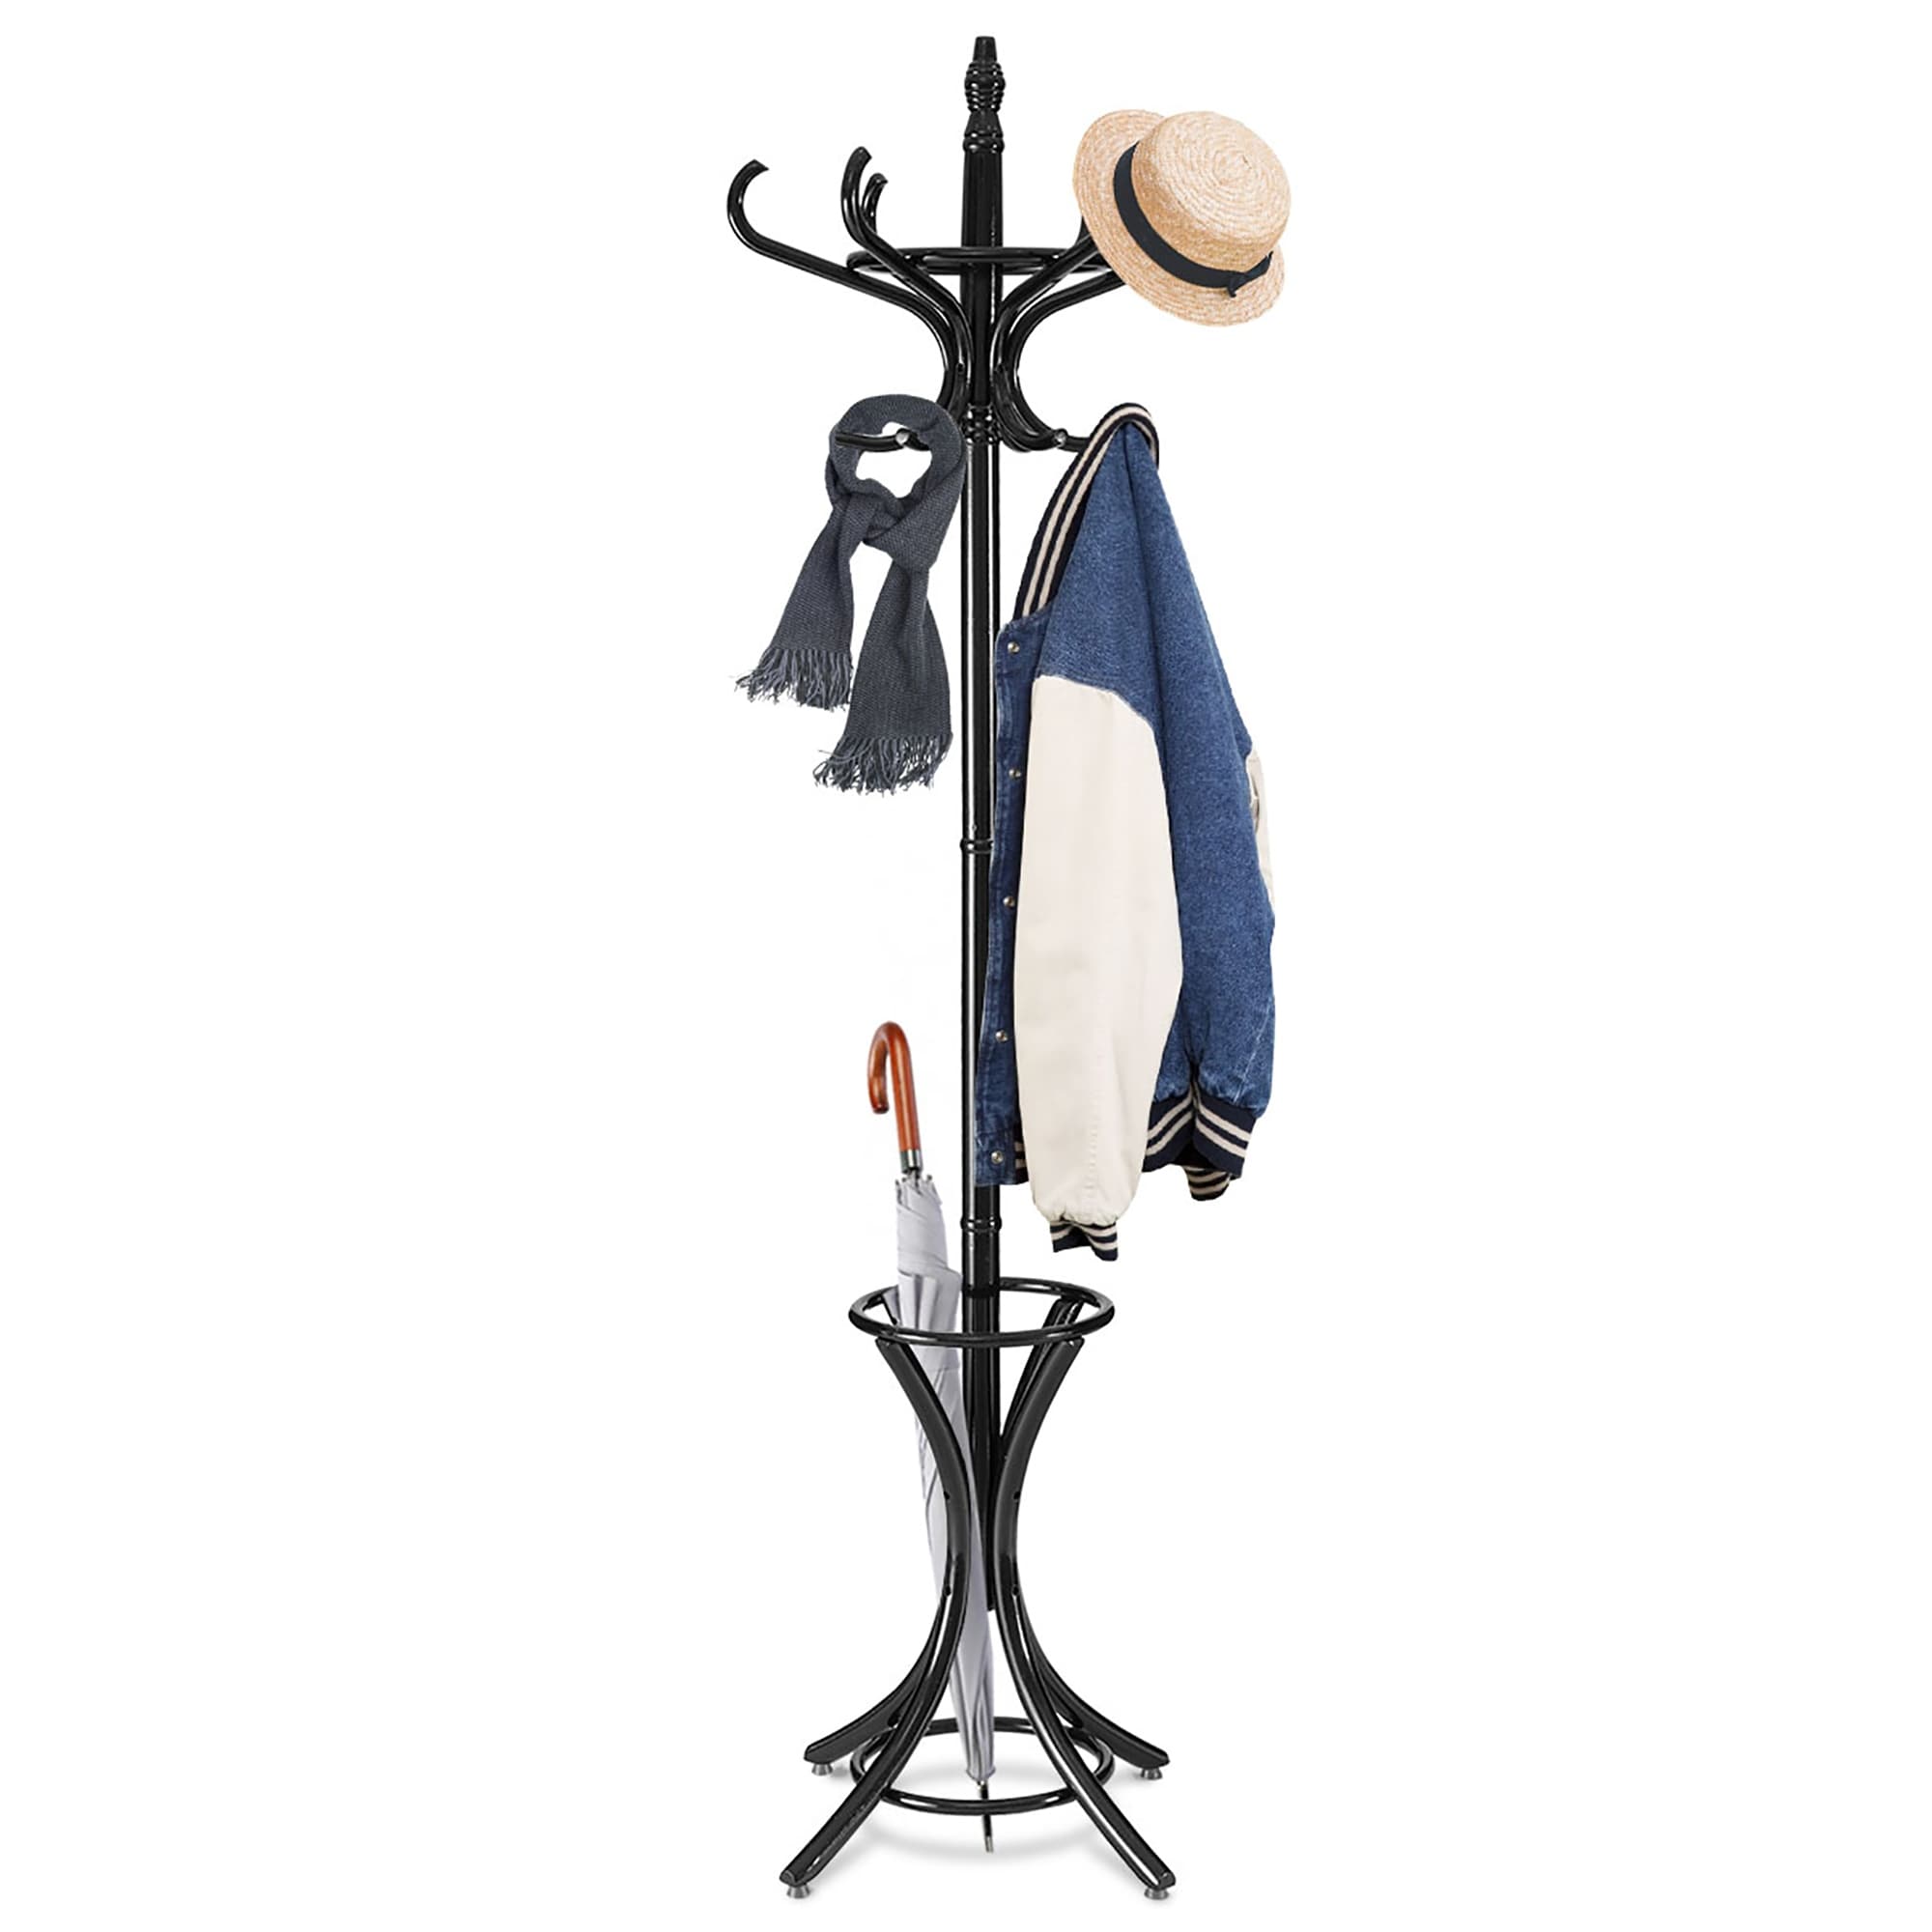 https://ak1.ostkcdn.com/images/products/is/images/direct/e5f307e94c5c1978277432001e685436db372820/Free-Standing-Coat-Rack-Wood-Coat-Tree-with-Hooks.jpg